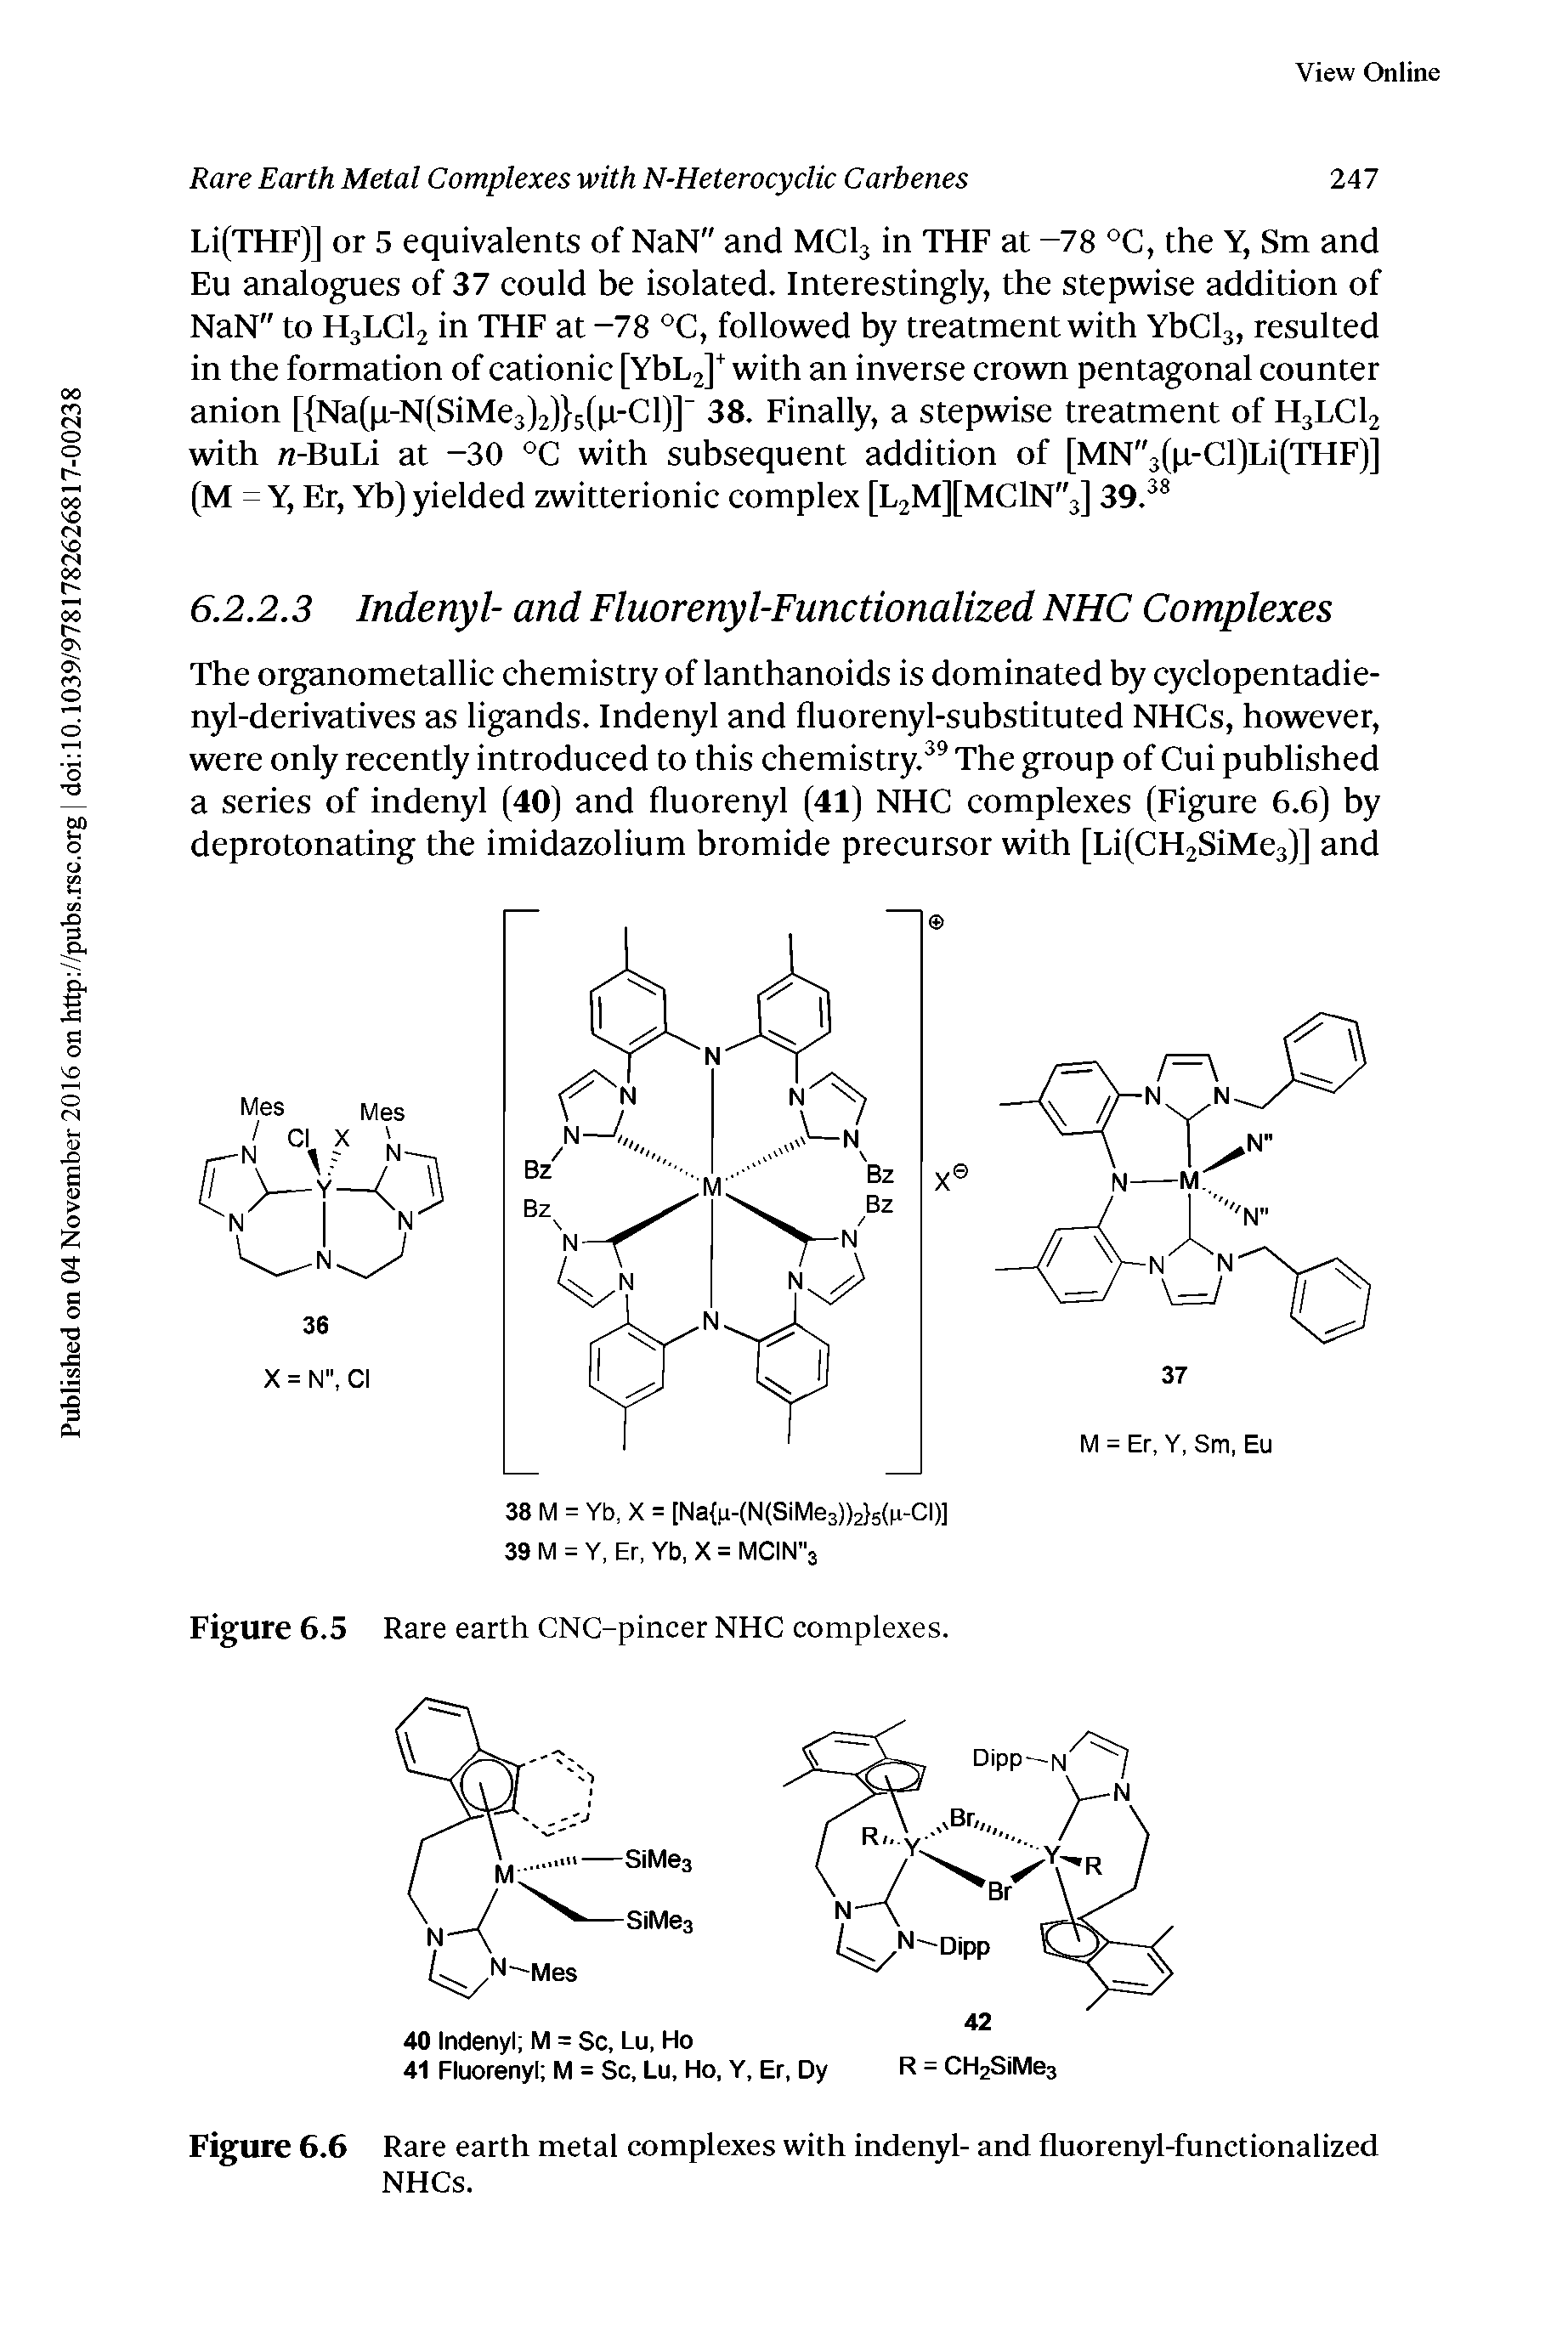 Figure 6.6 Rare earth metal complexes with indenyl- and fluorenyl-functionalized NHCs.